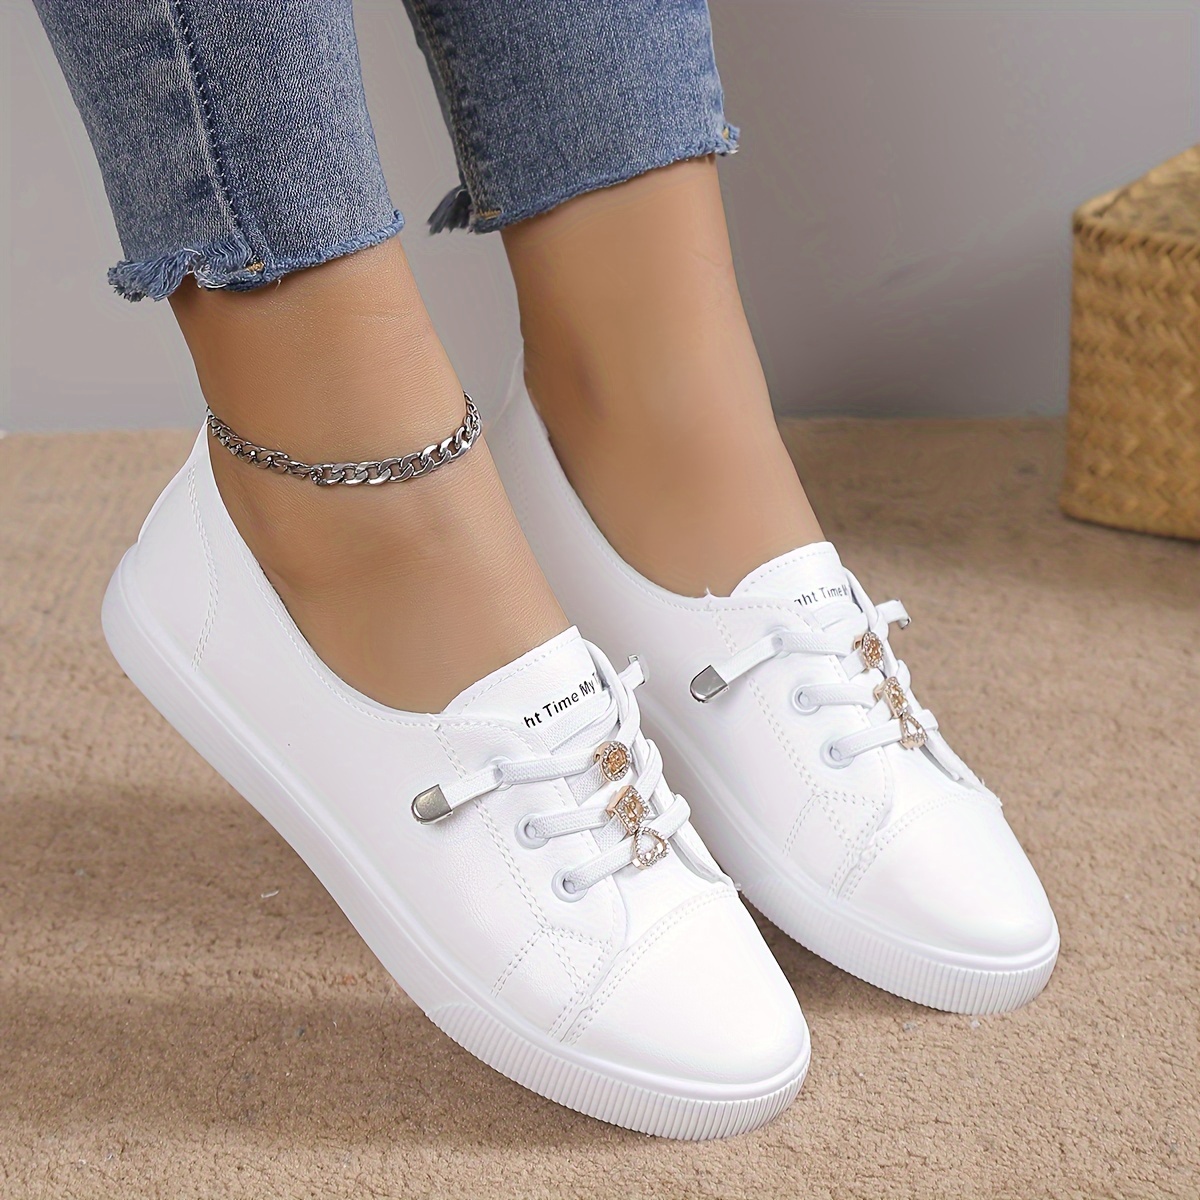 Lightweight Women's Skate Shoes - Versatile White Low Tops, Comfortable Casual Sneakers for All-Day Wear, Perfect for Outdoor Activities & Holidays